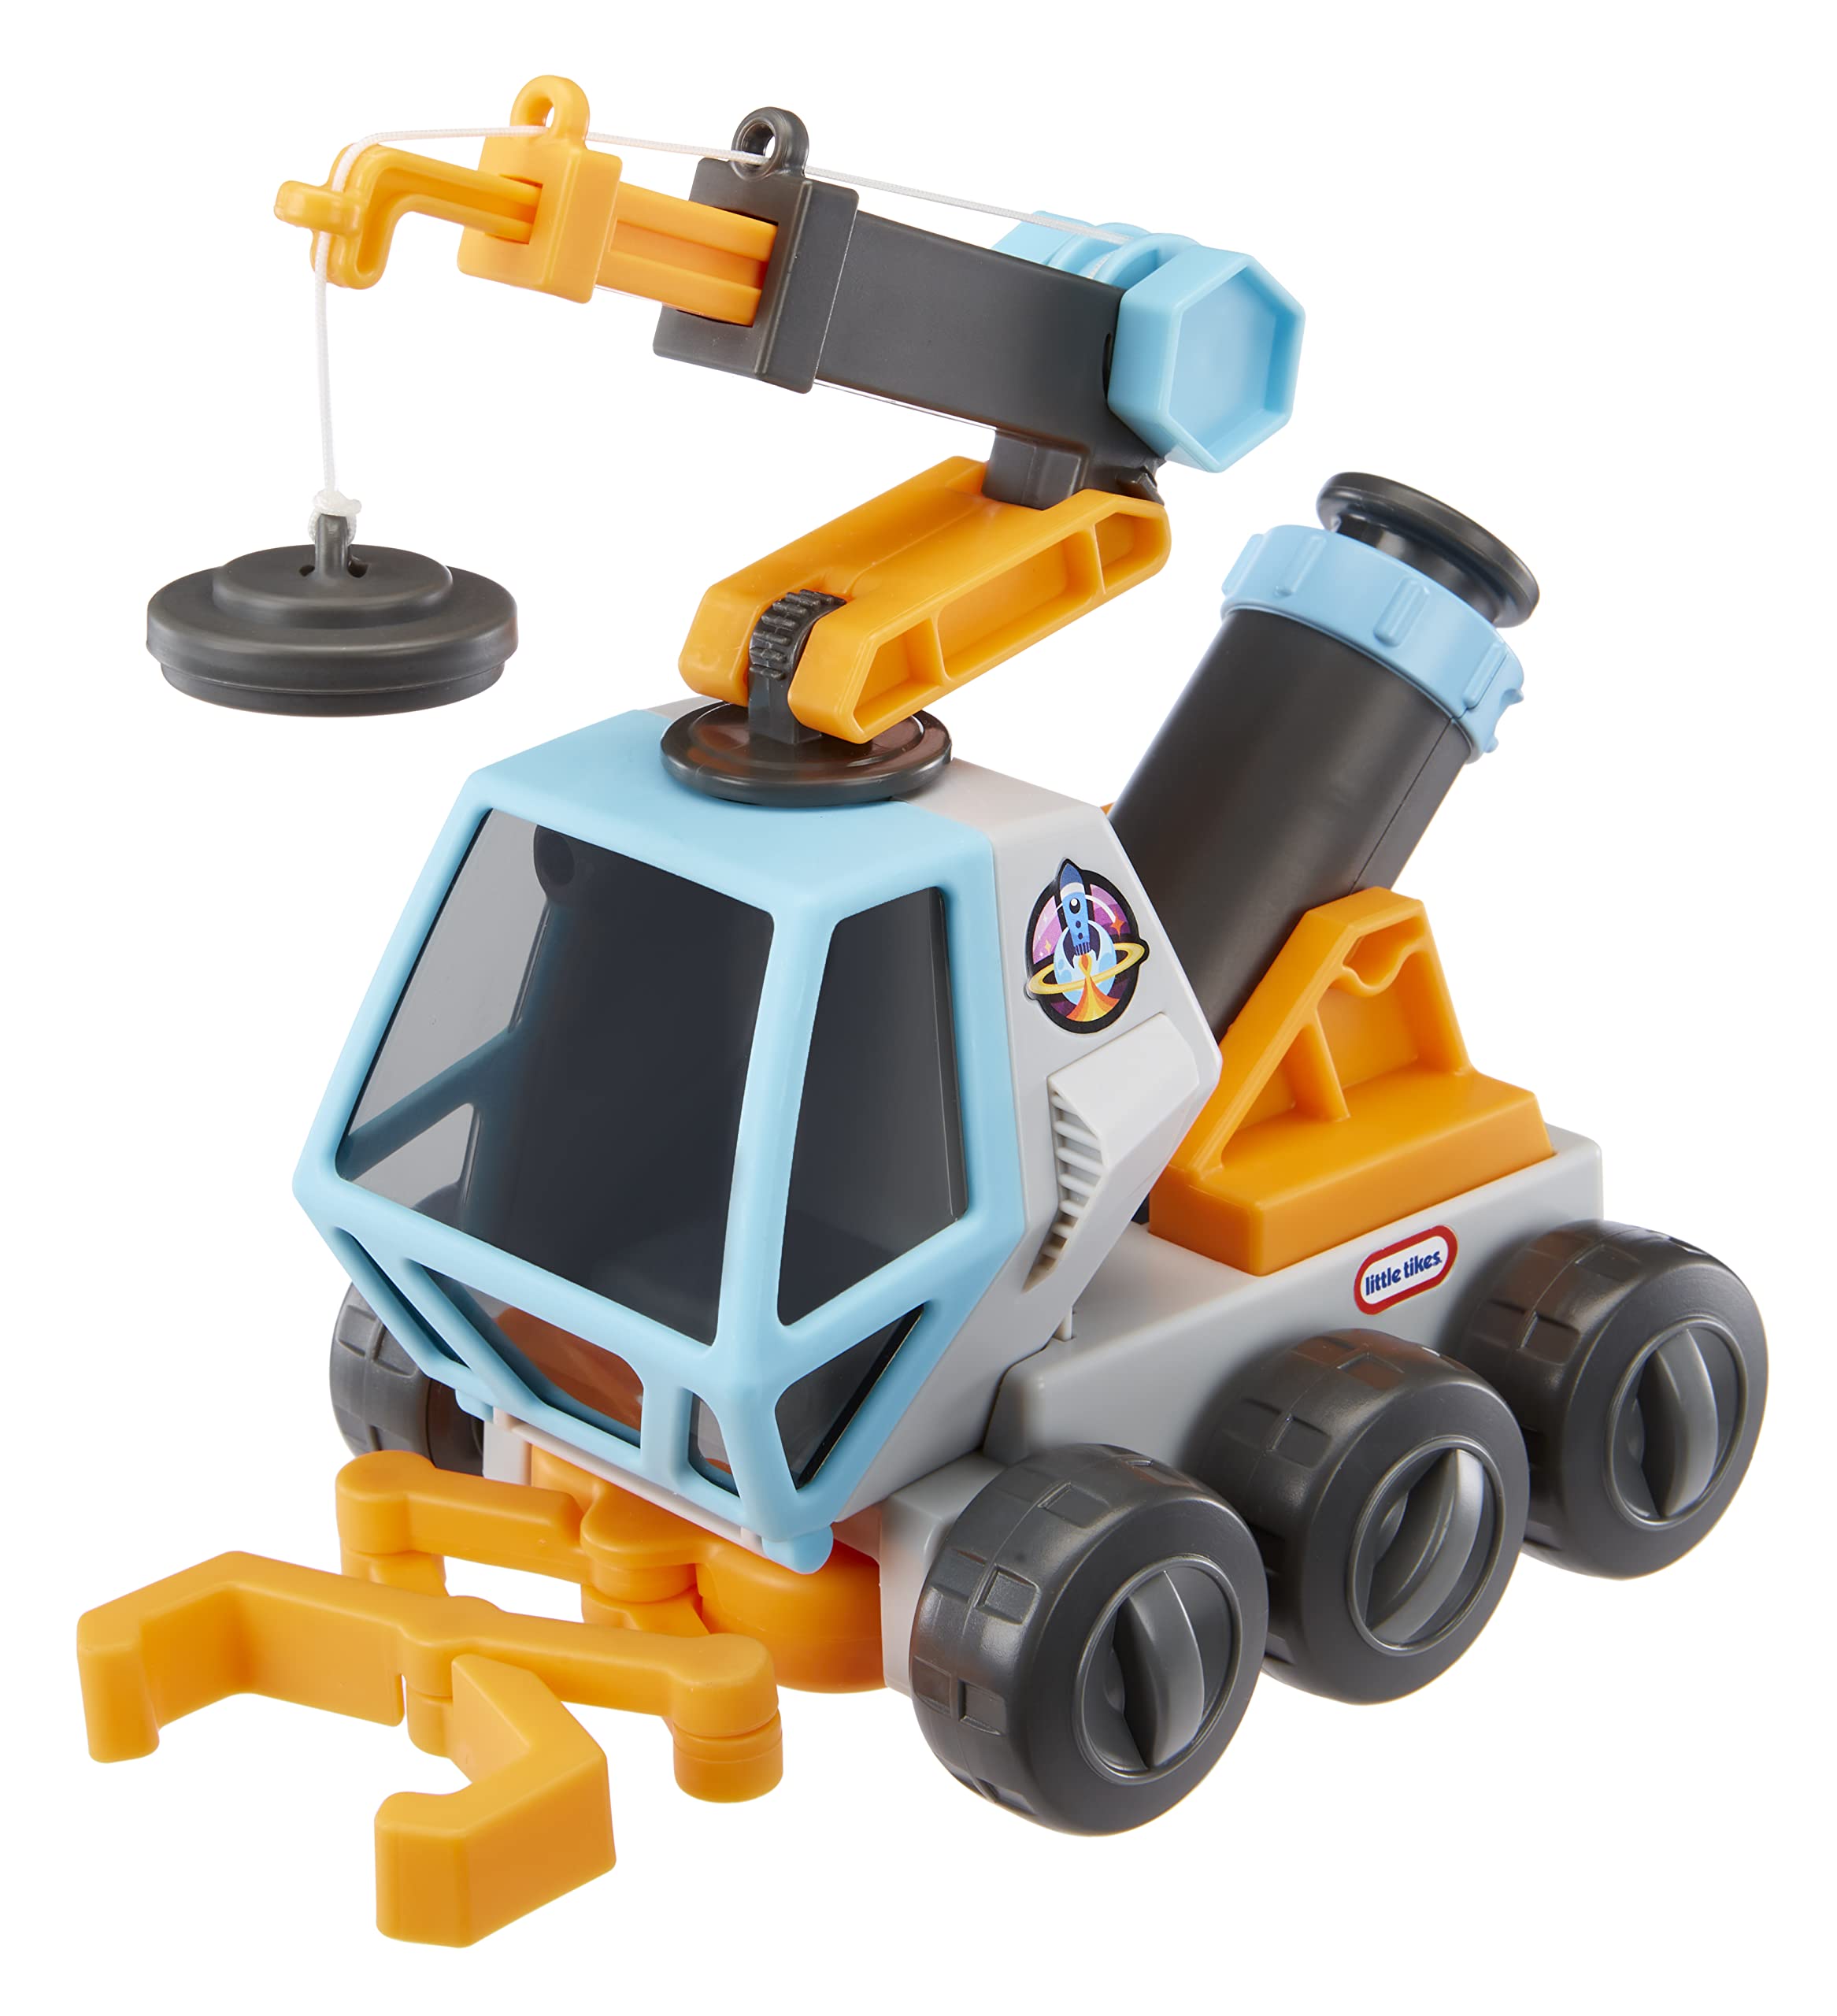 Little Tikes Big Adventures Space Rover STEM Toy Vehicle with Microscope, Magnetic Crane, Extending Grabber for Girls, Boys, Kids Ages 3+